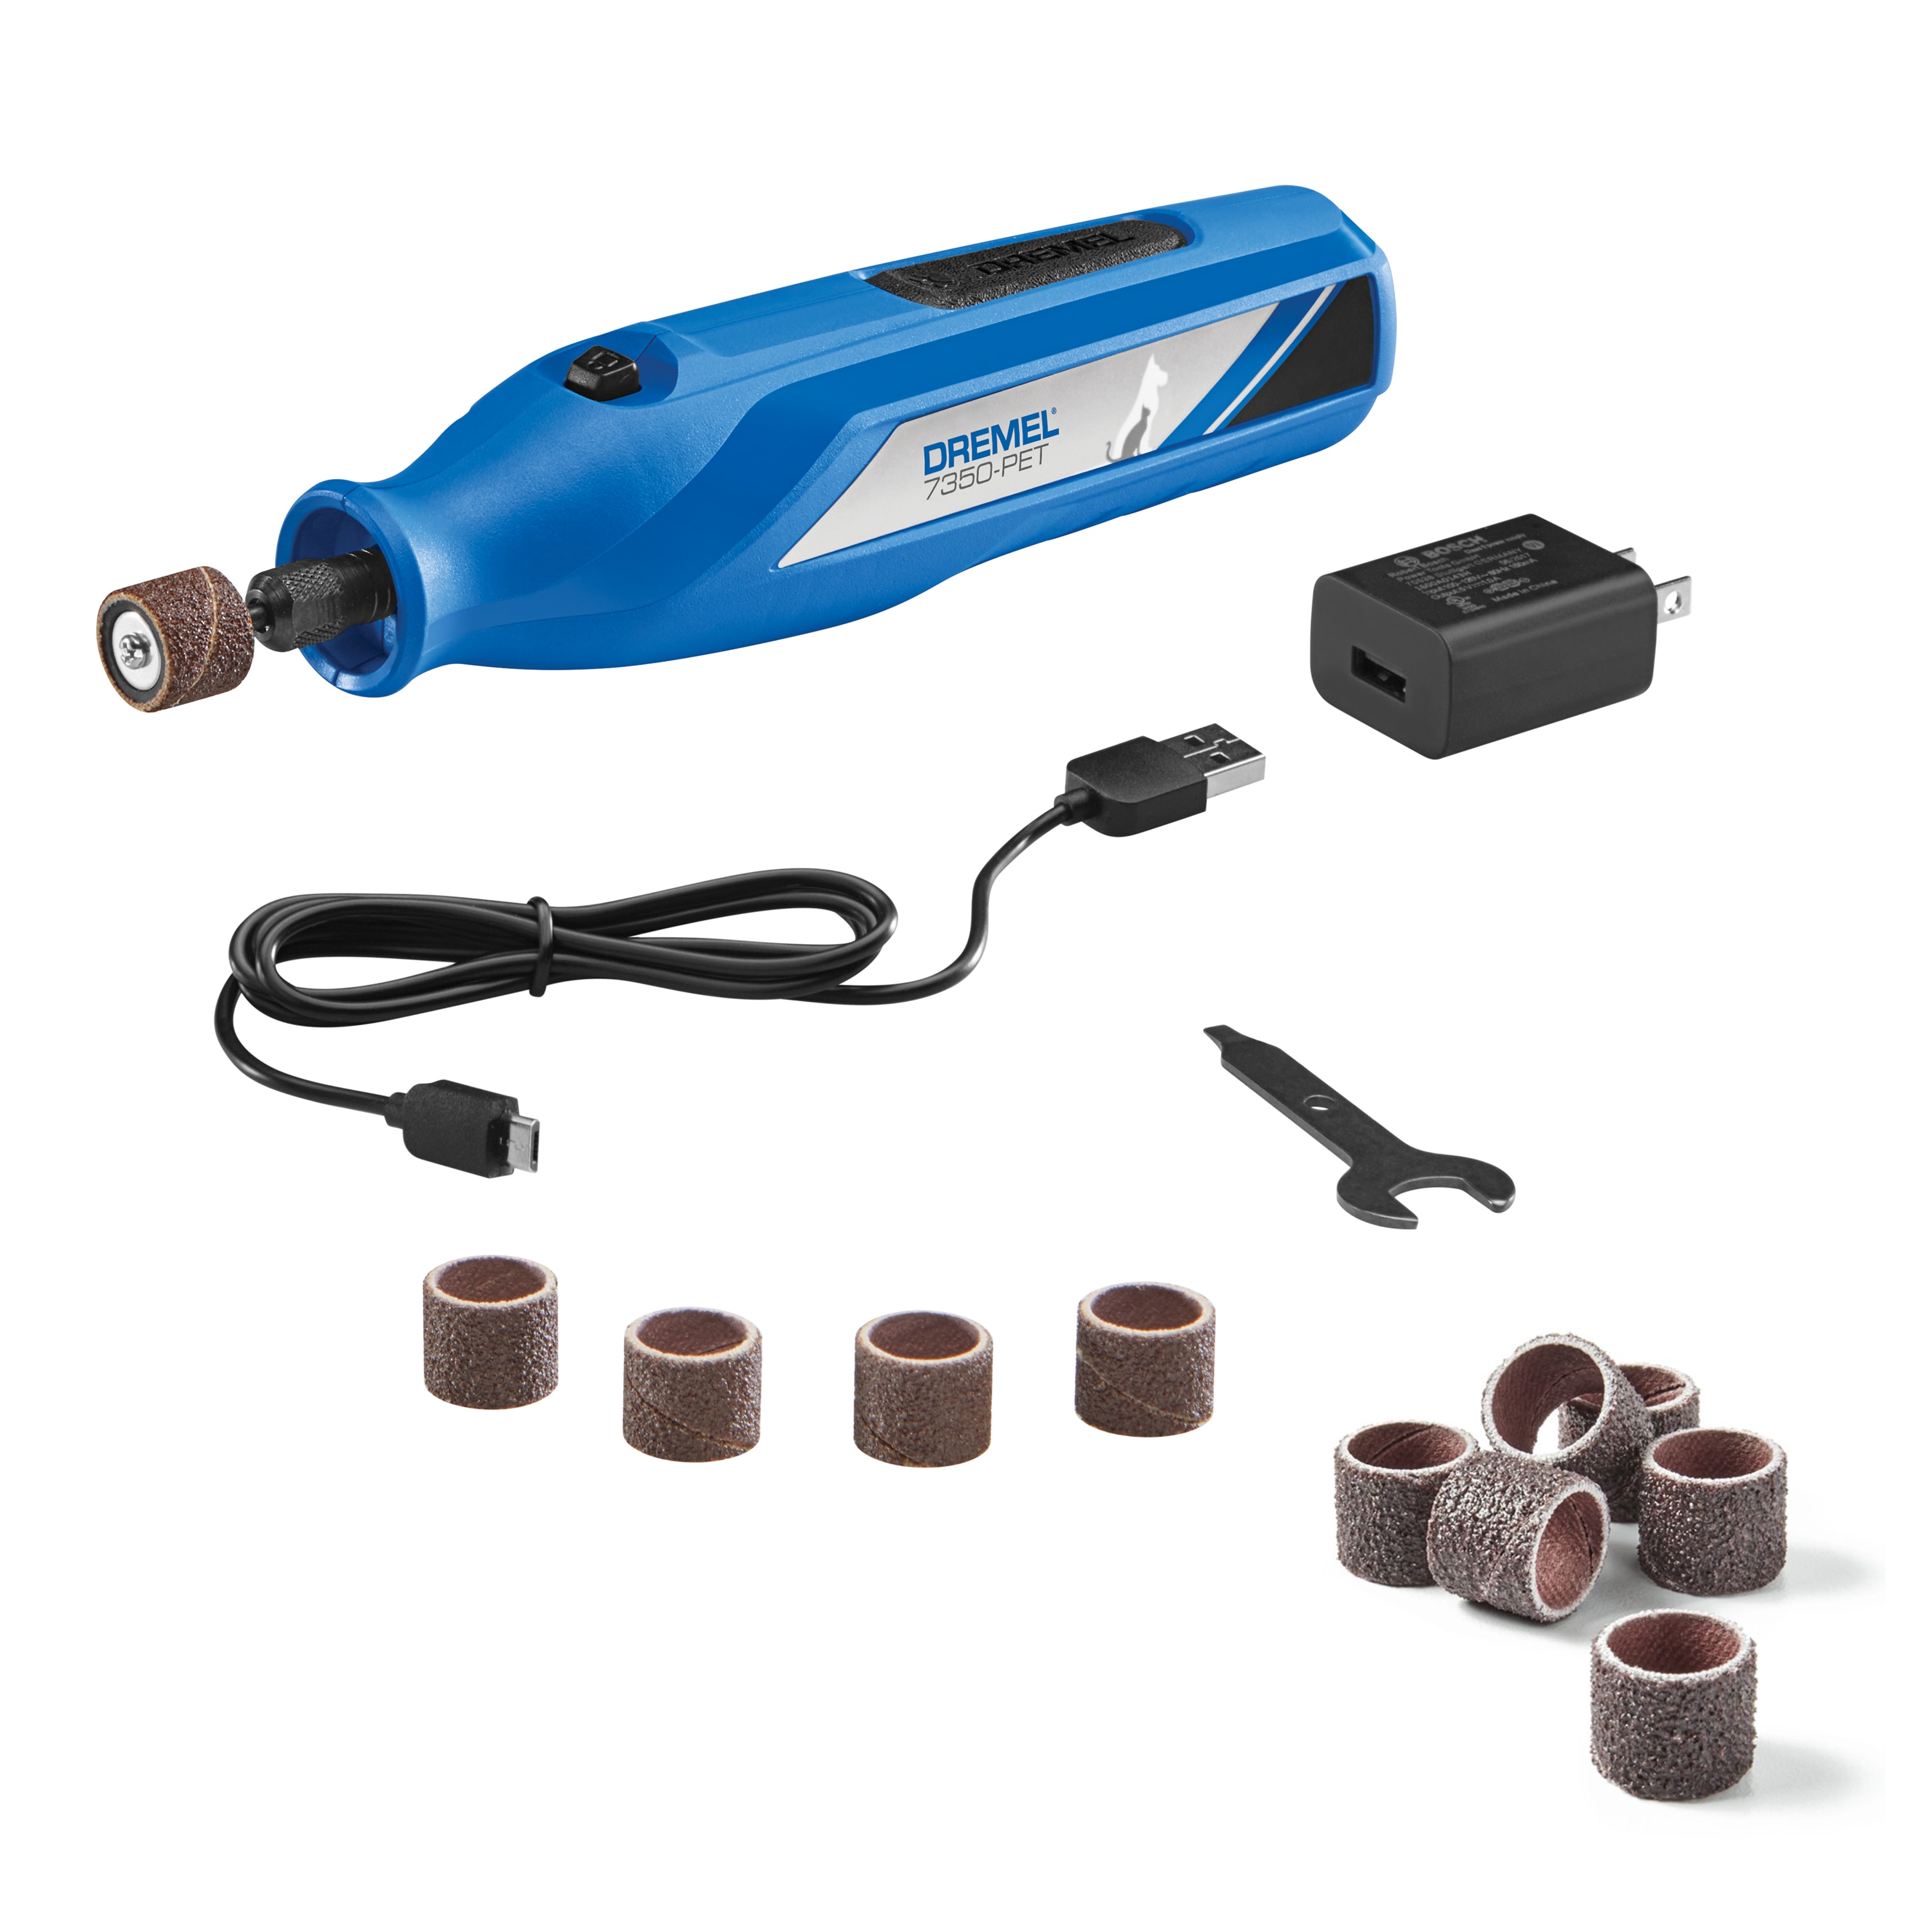 Shop Dremel 4-Volt Pet Cordless Rotary Tool Kit with 6-Piece 1/2-in Sanding Disc Accessory at Lowes.com